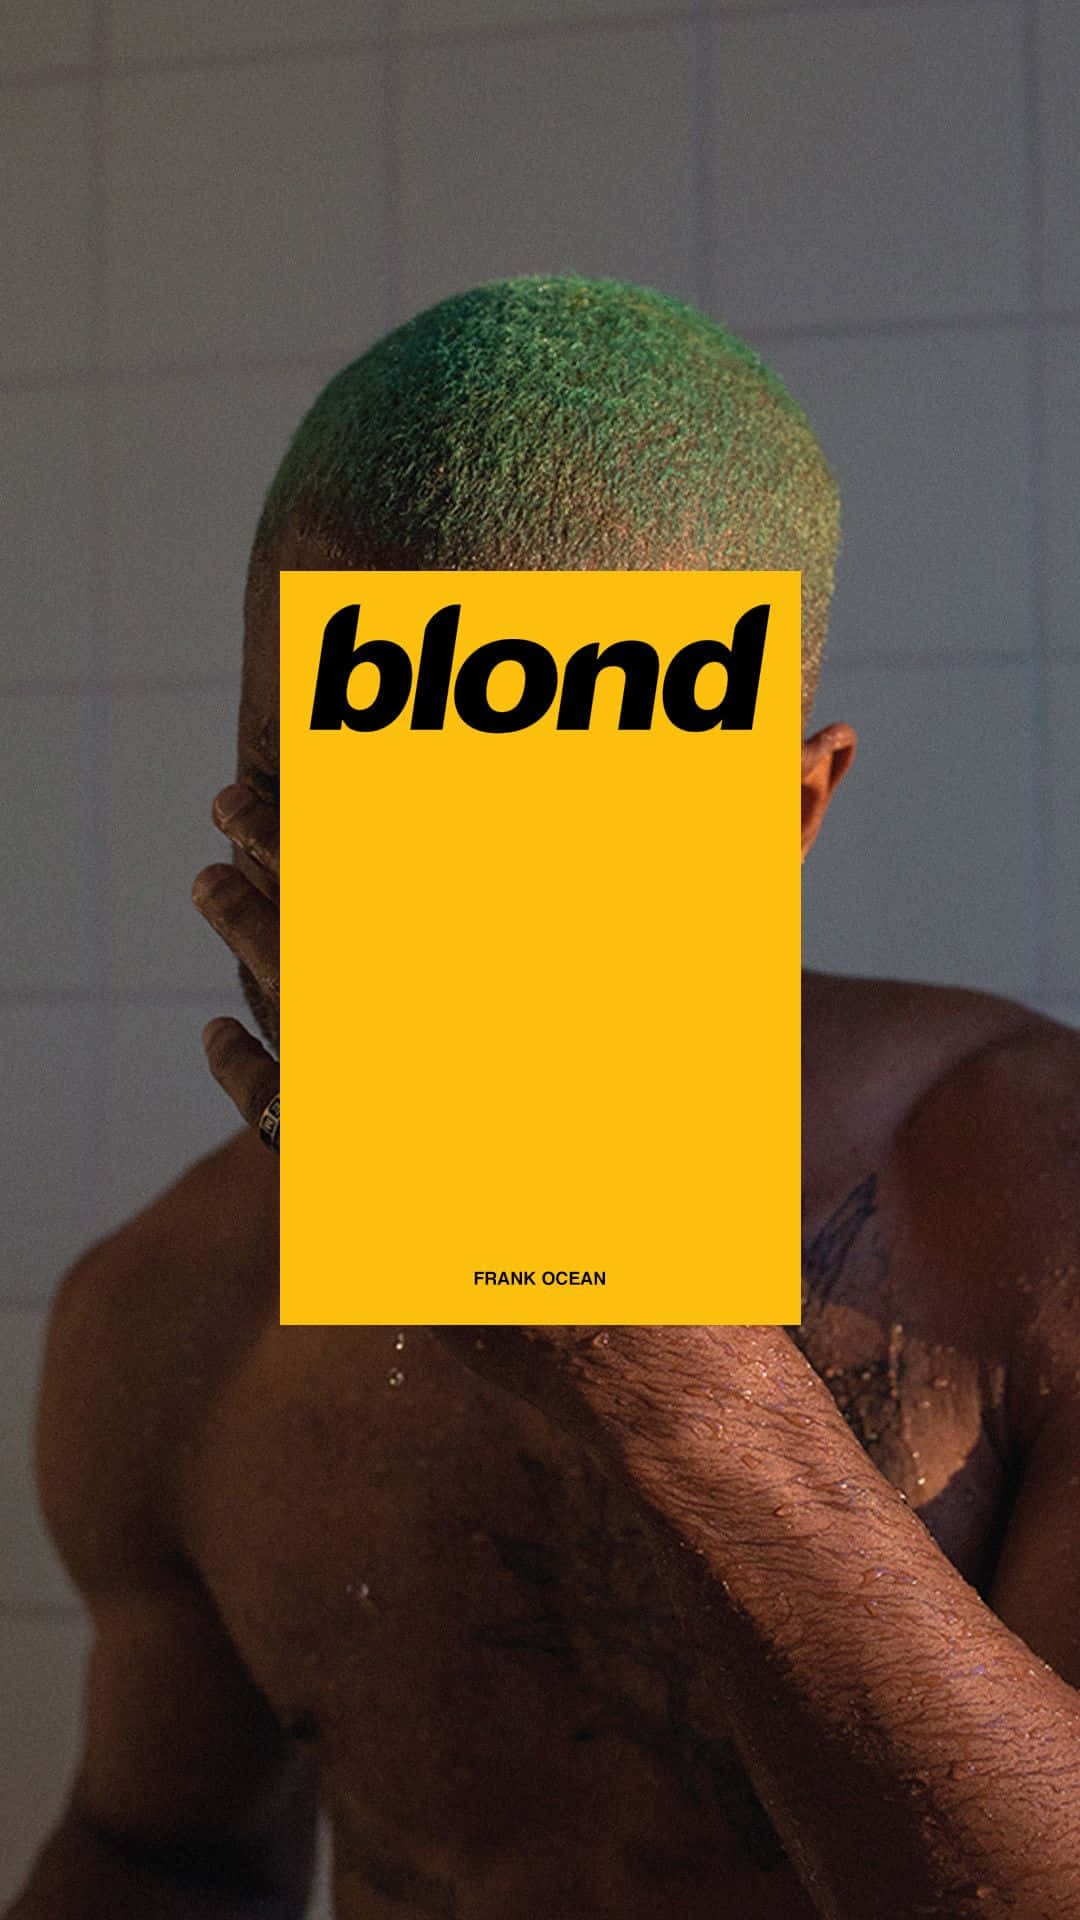 Frank Ocean in his critically acclaimed 2016 album 'Blonde' Wallpaper